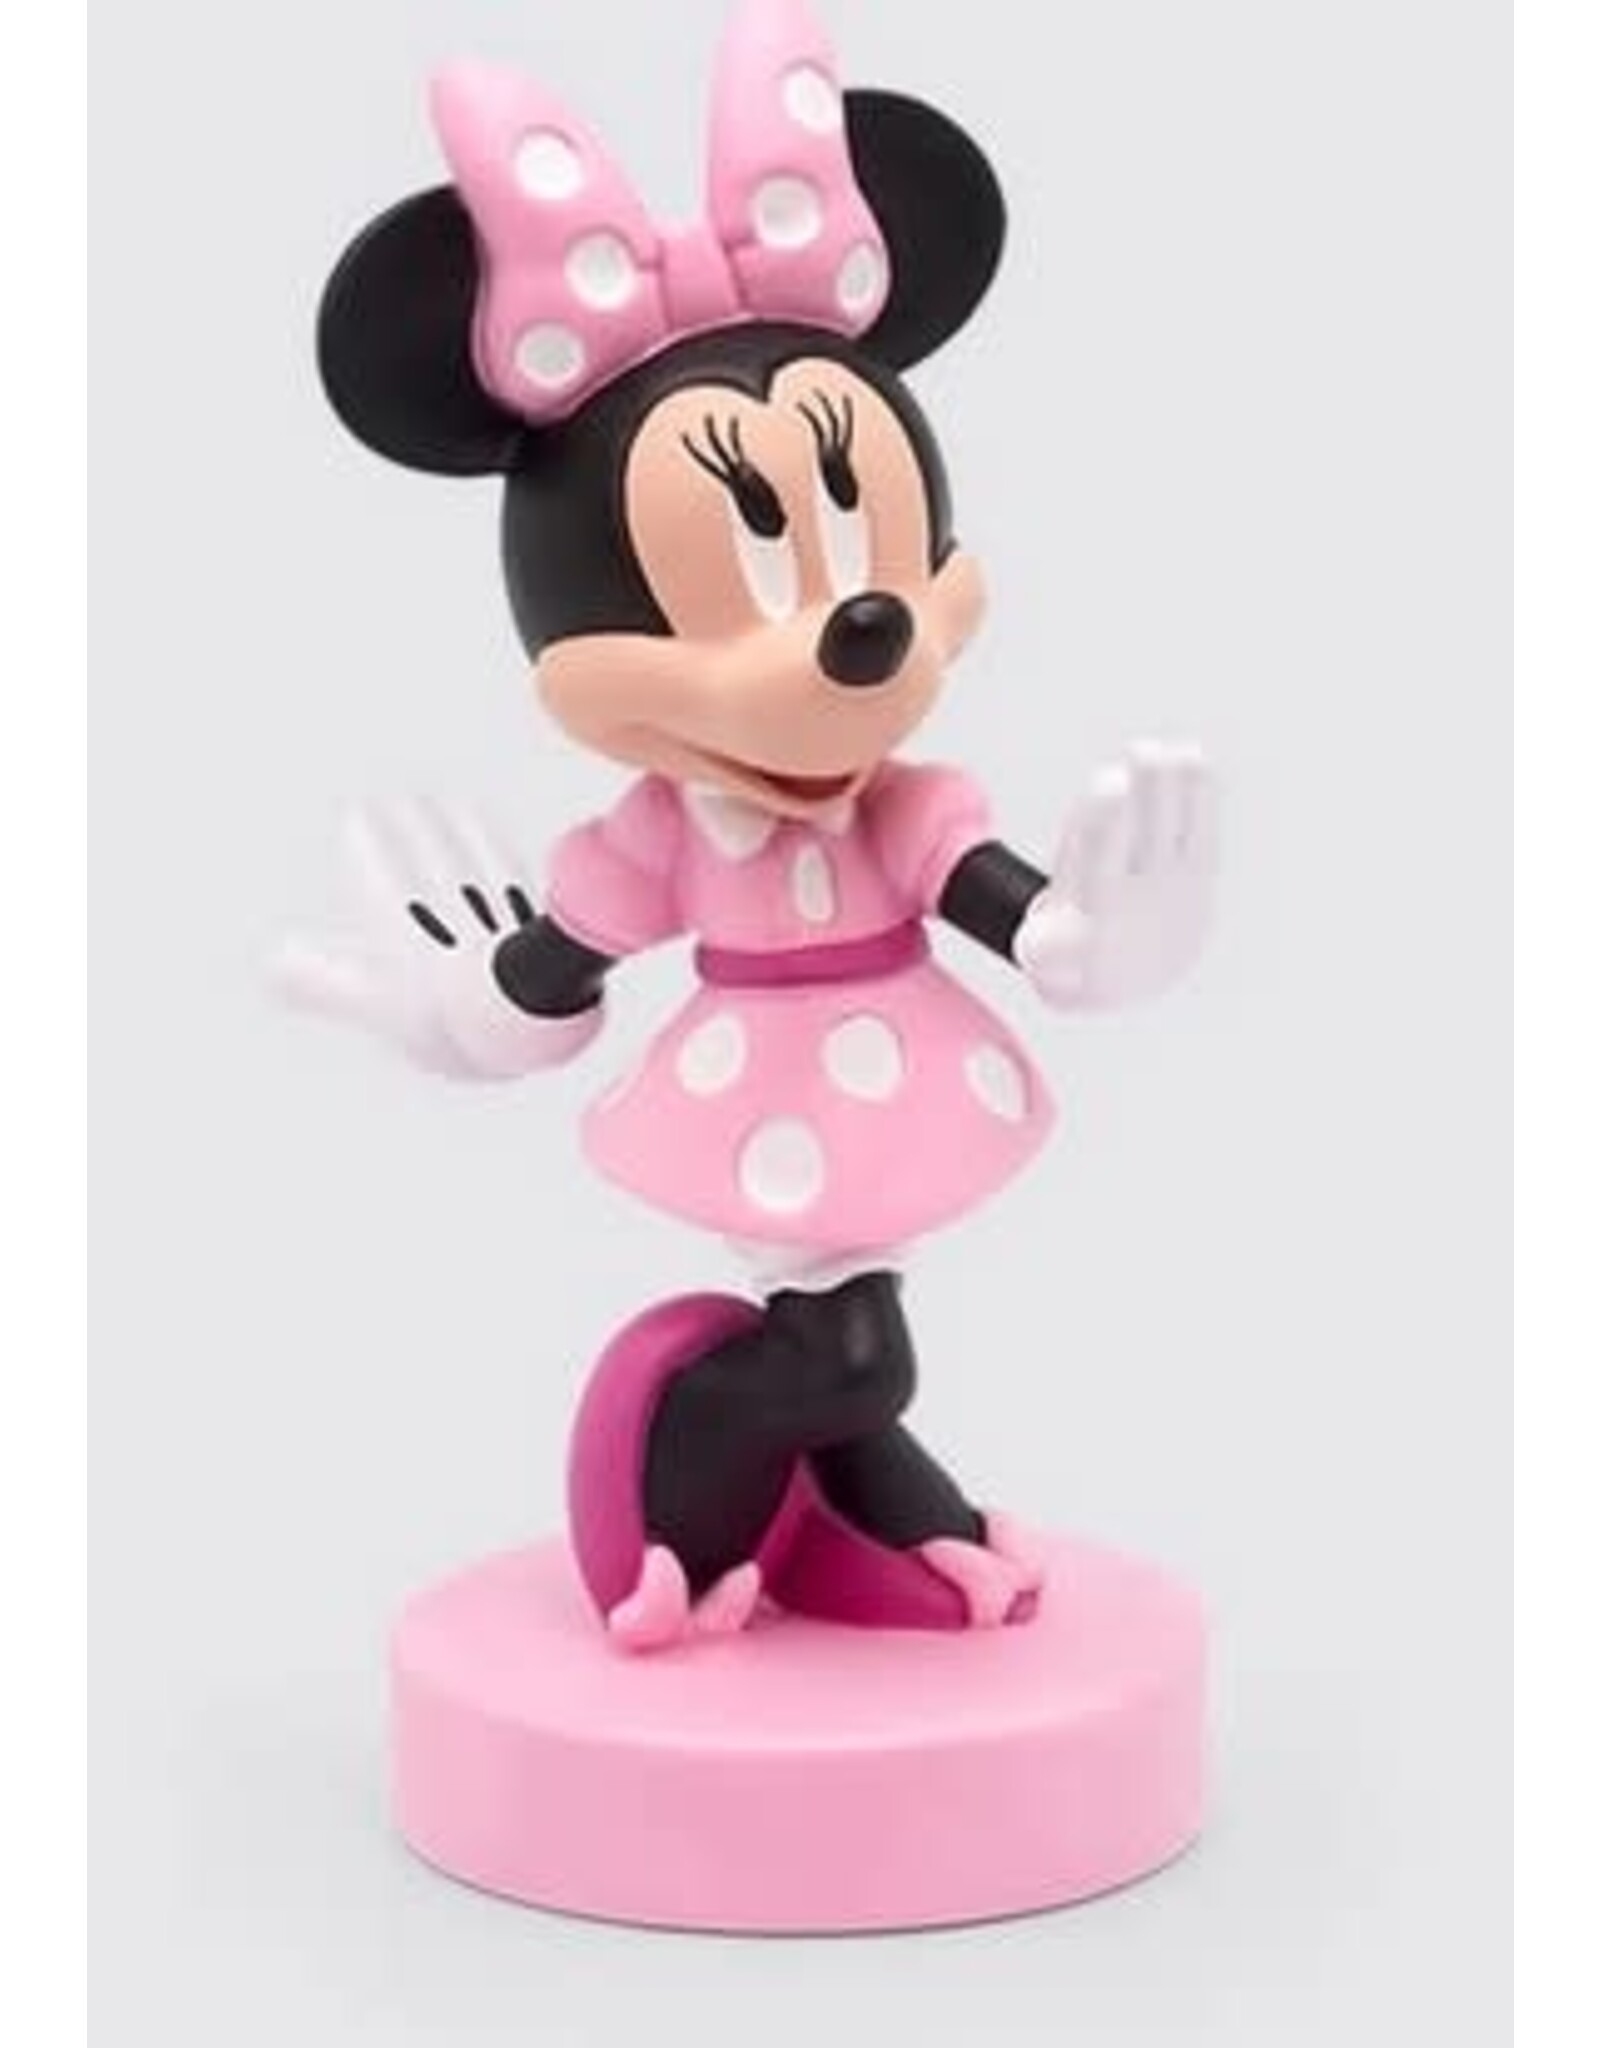 tonies Minnie Mouse Tonie Character